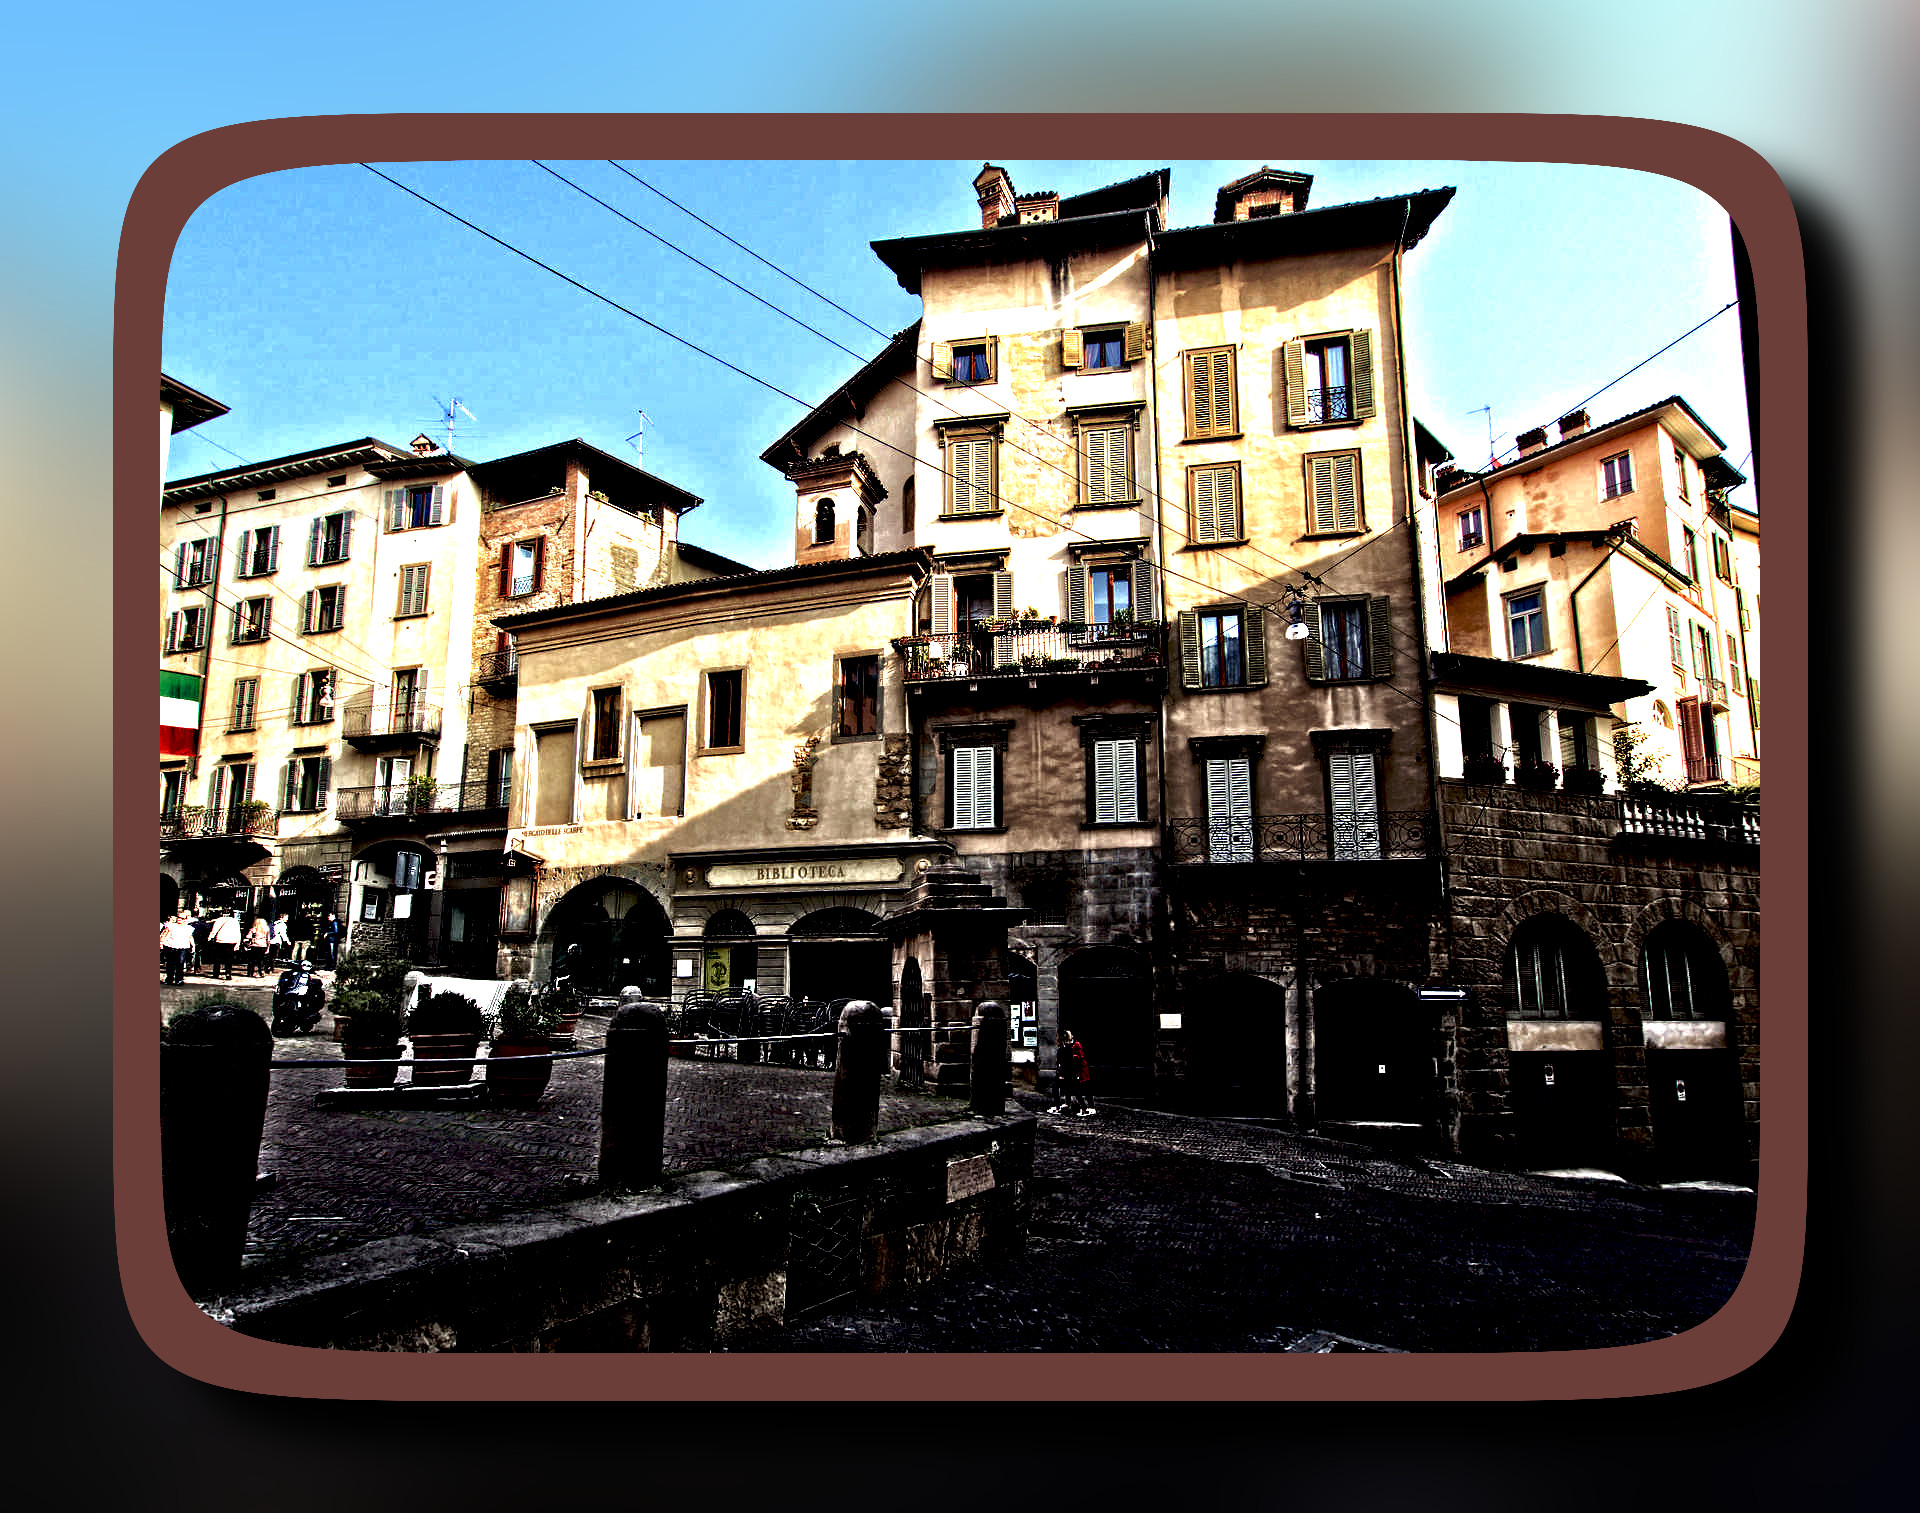 2023-08-24 21-20-09old_buildings_by_sergiba_dcrpdbt-fullview with a framed B&W effect, styleEmboss.jpeg